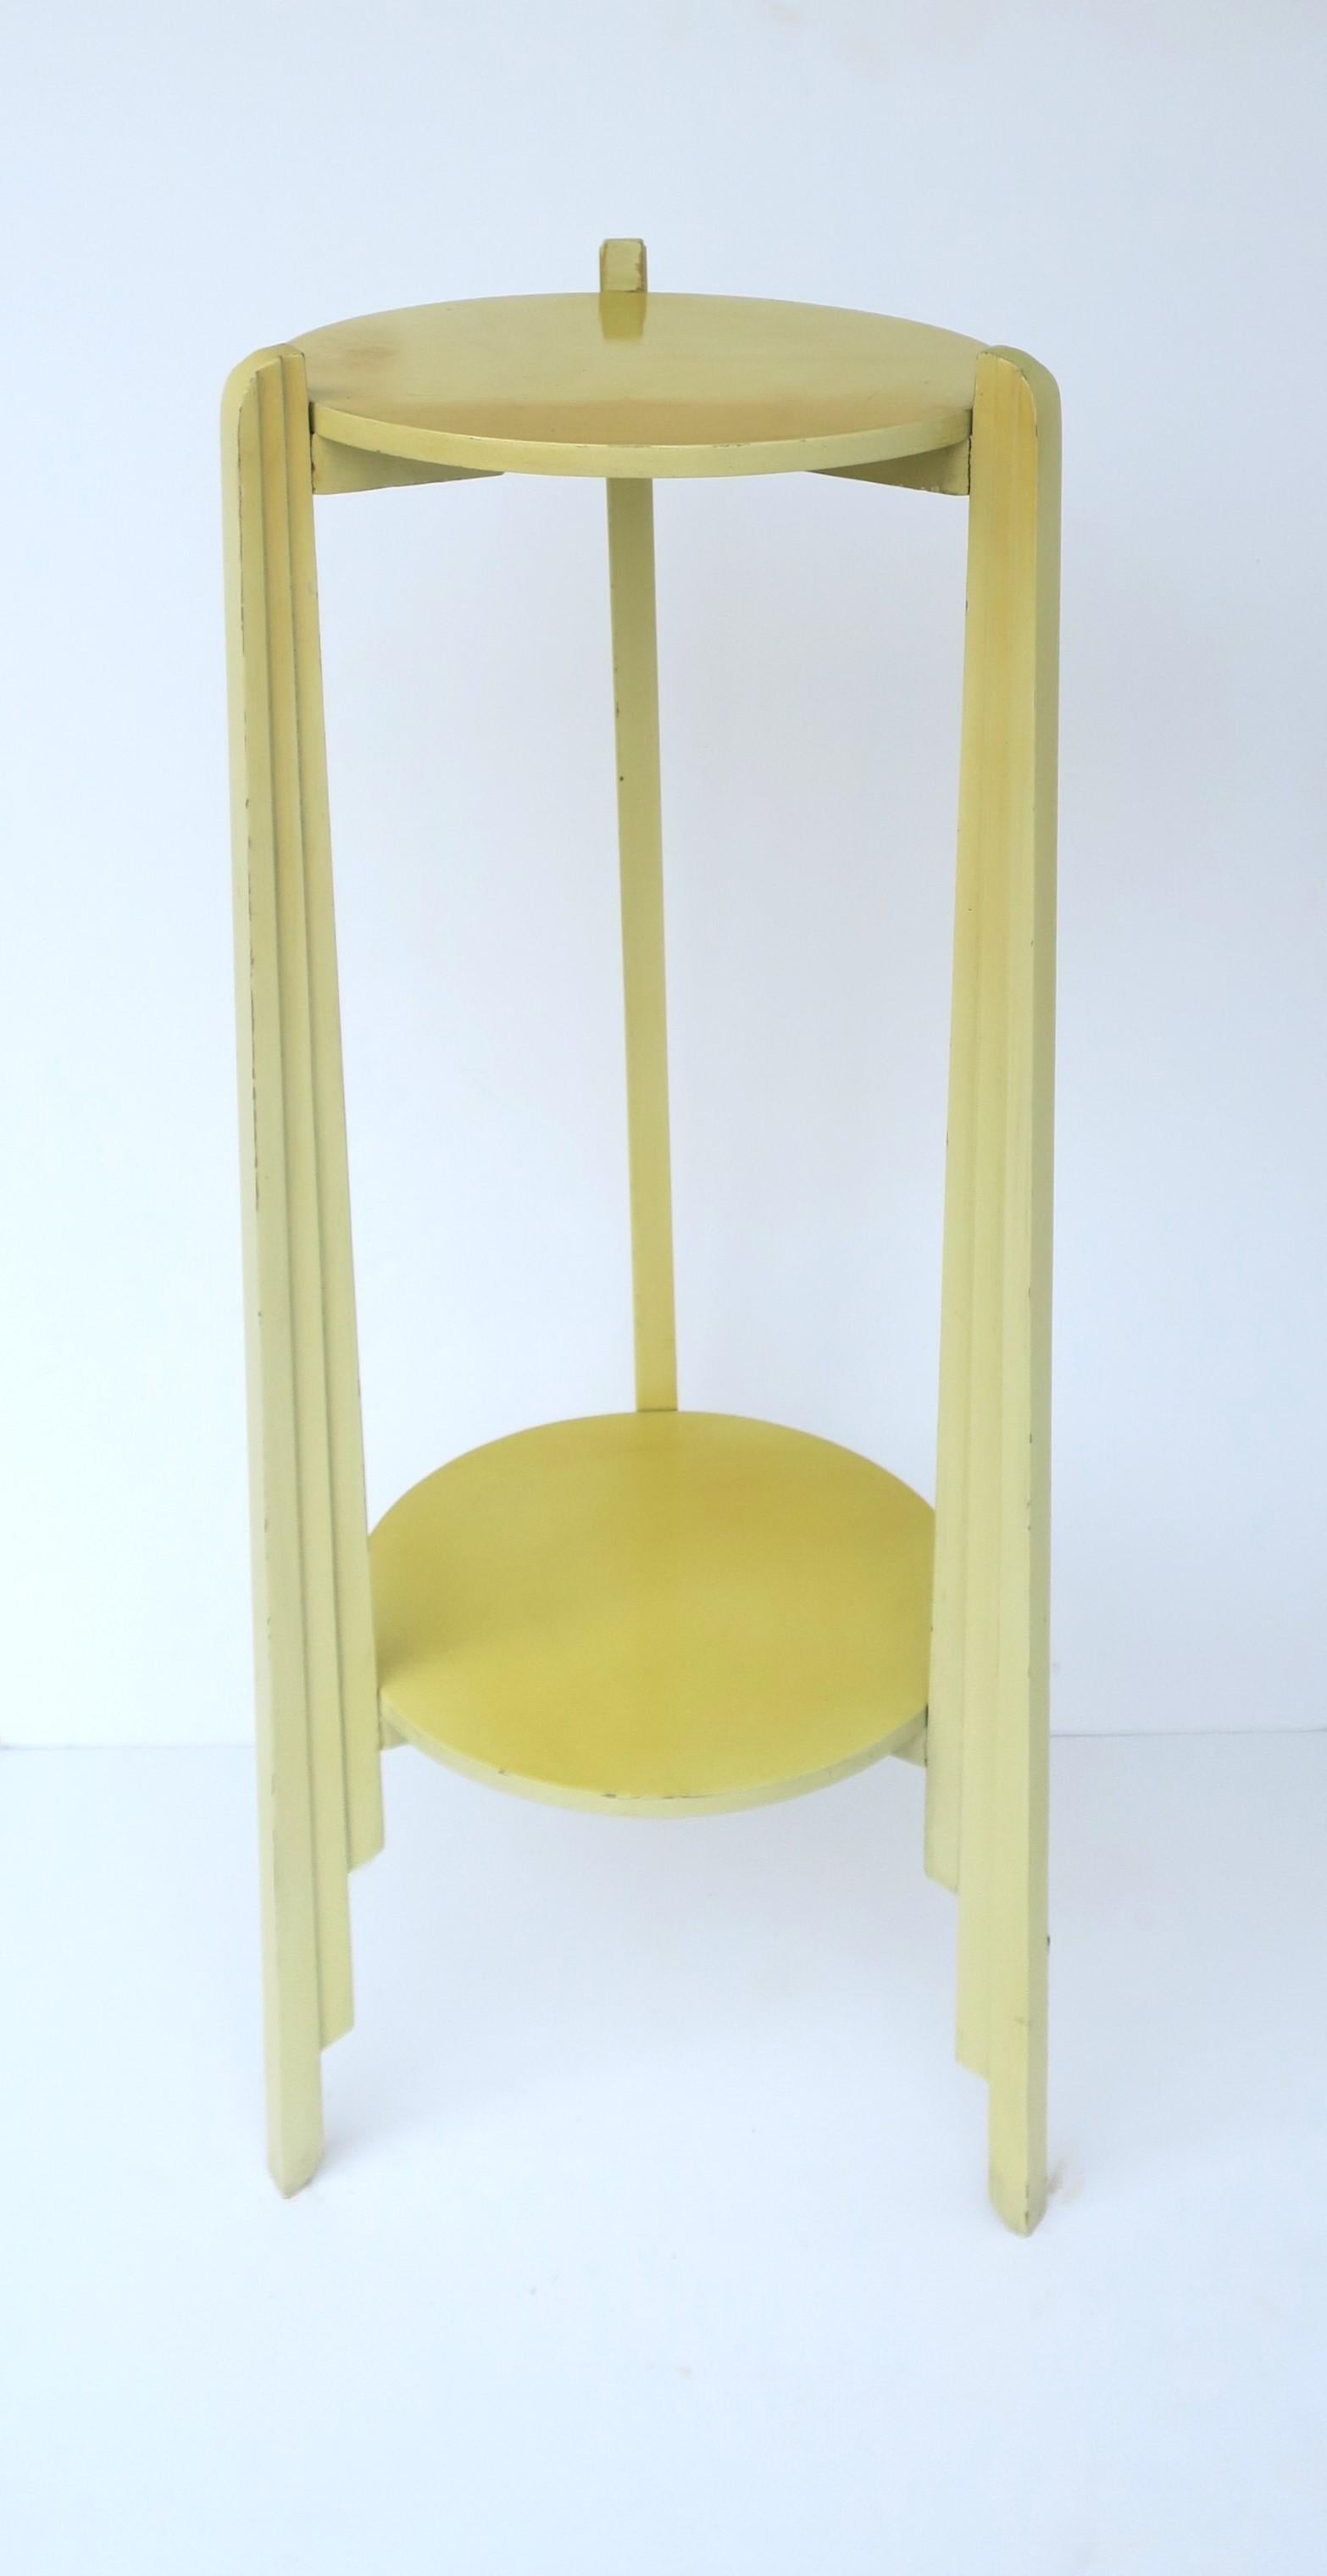 **There are two available, each sold separately, as per listing.

A yellow column pillar pedestal stand with lower shelf, Art Deco period, circa early to mid-20th century. Column is wood with a yellow paint finish, tri-pod legs with Art Deco detail,